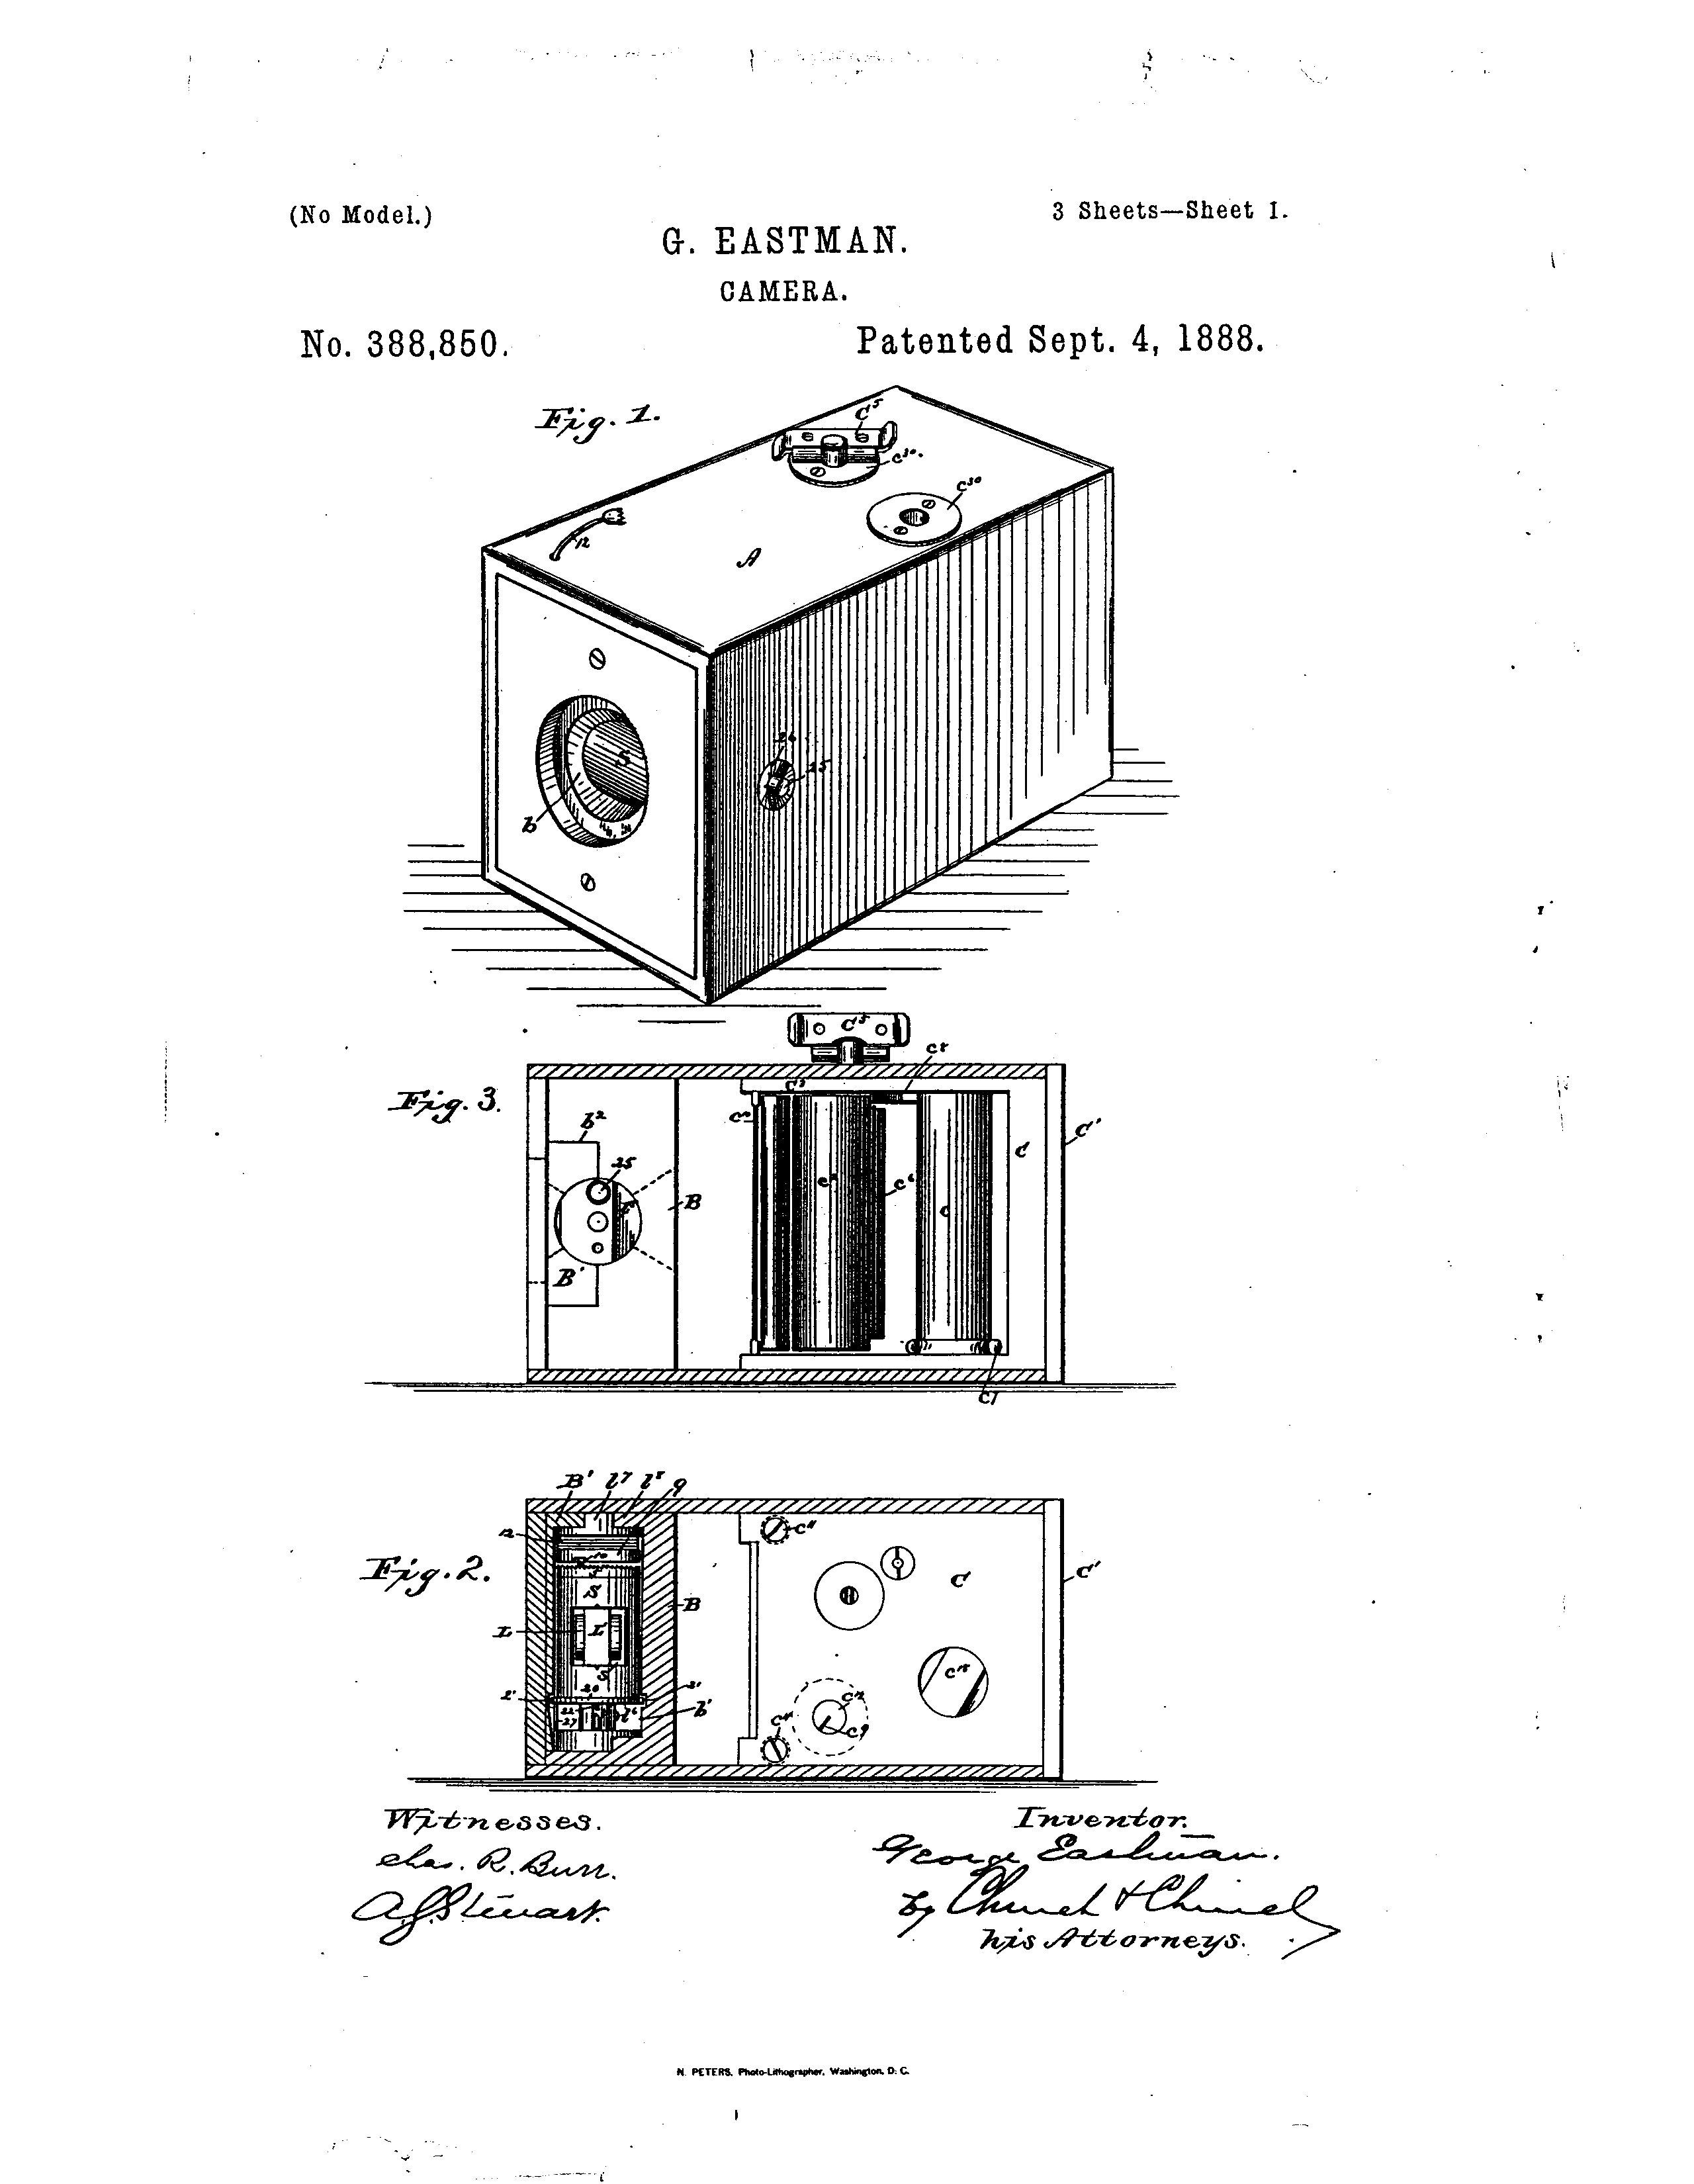 125 Years Ago Today George Eastman Patented The Box Camera Trademarked Kodak